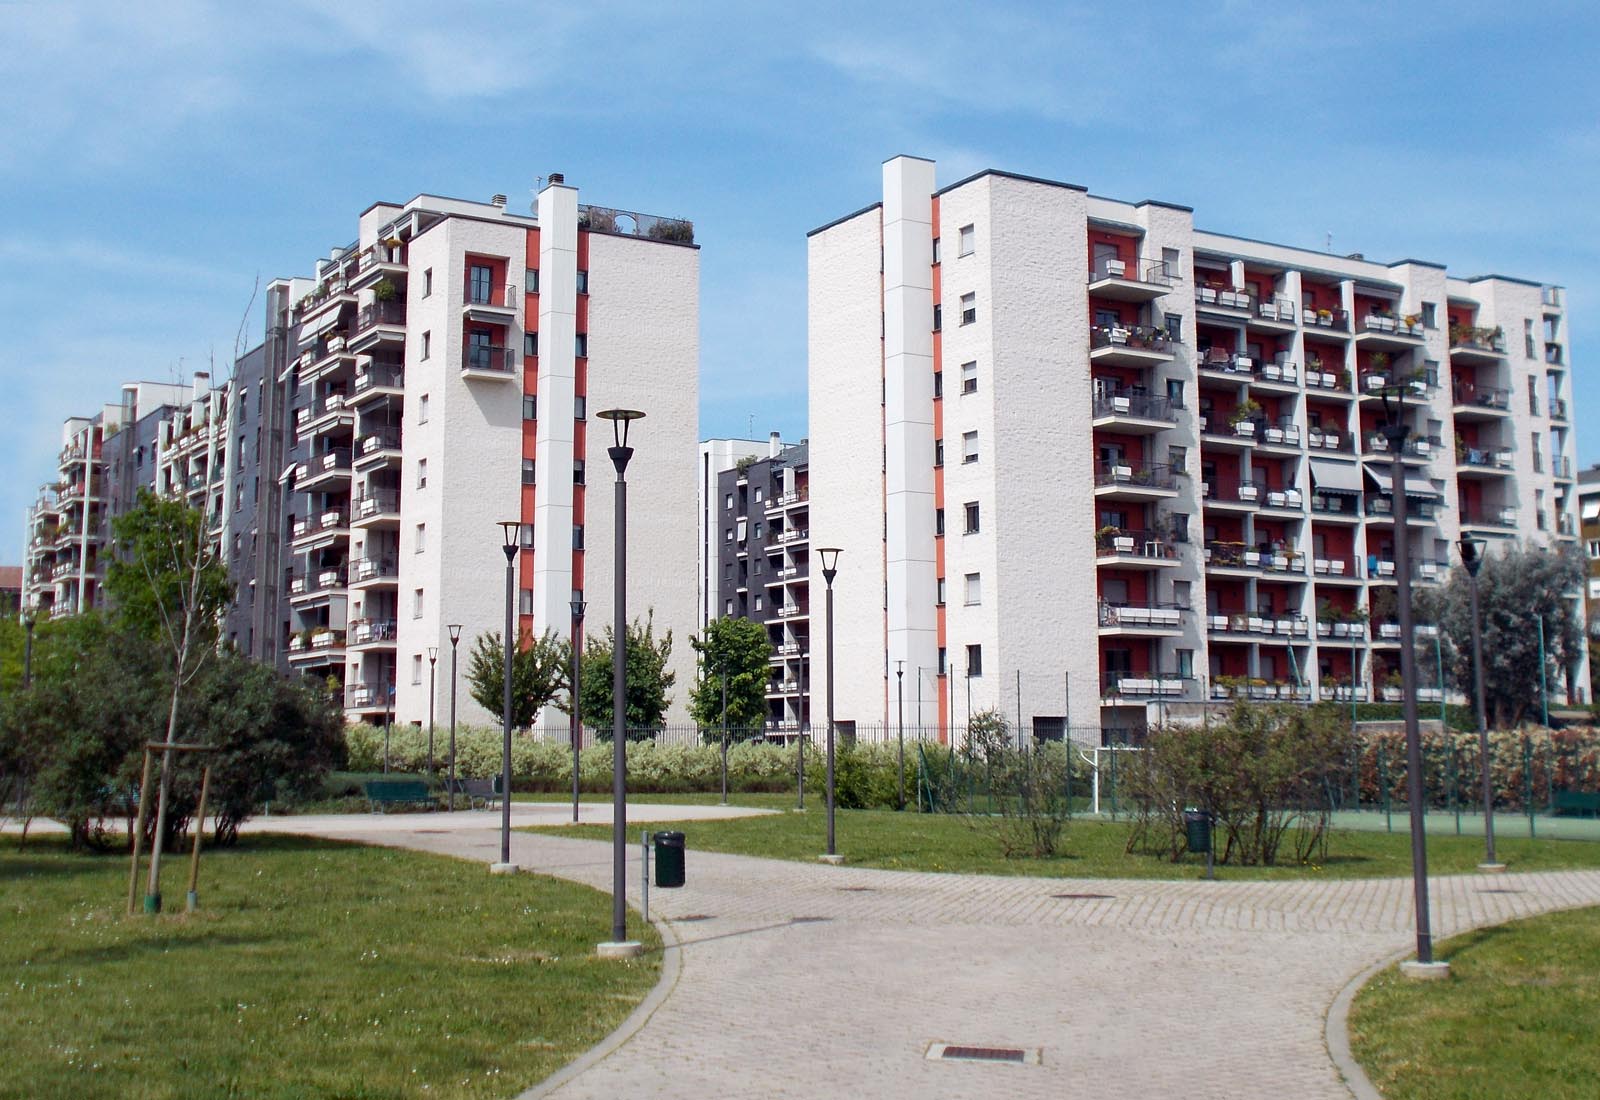 Residential ensemble Grazioli in Milan - View from the park